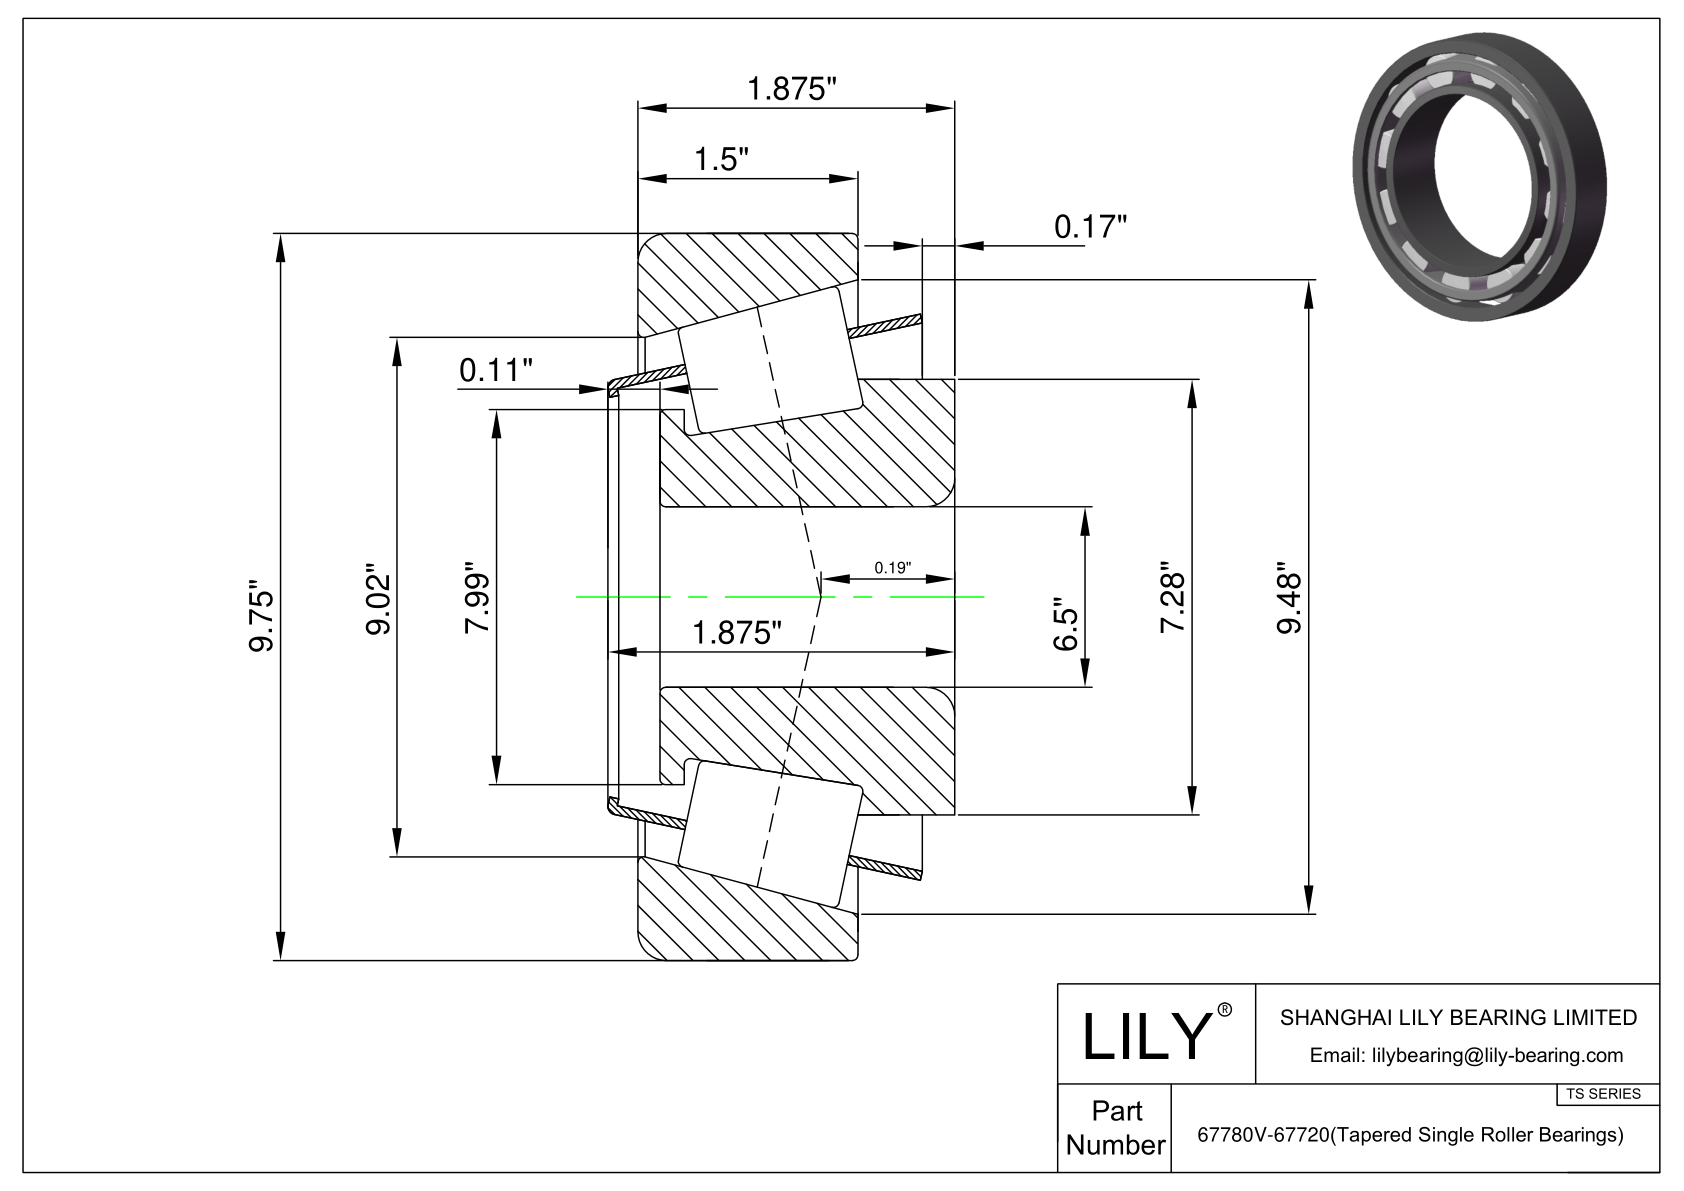 67780V-67720 TS (Tapered Single Roller Bearings) (Imperial) cad drawing